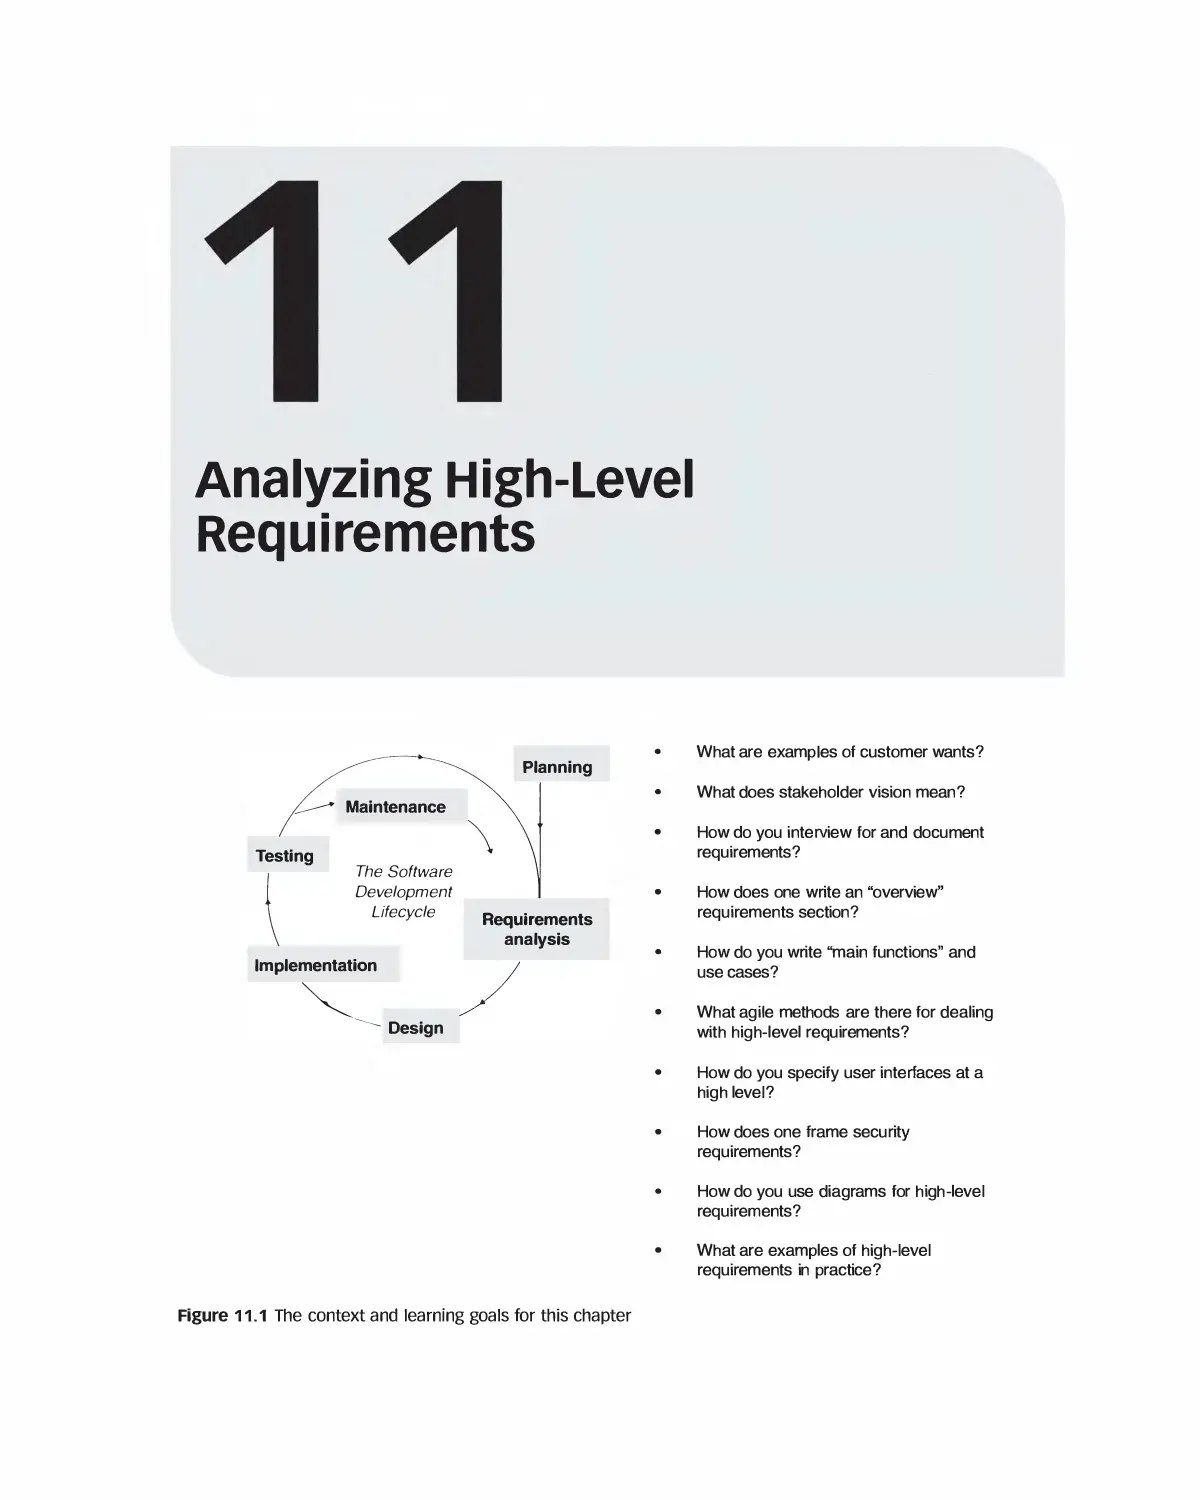 Chapter 11: Analyzing High-Level Requirements